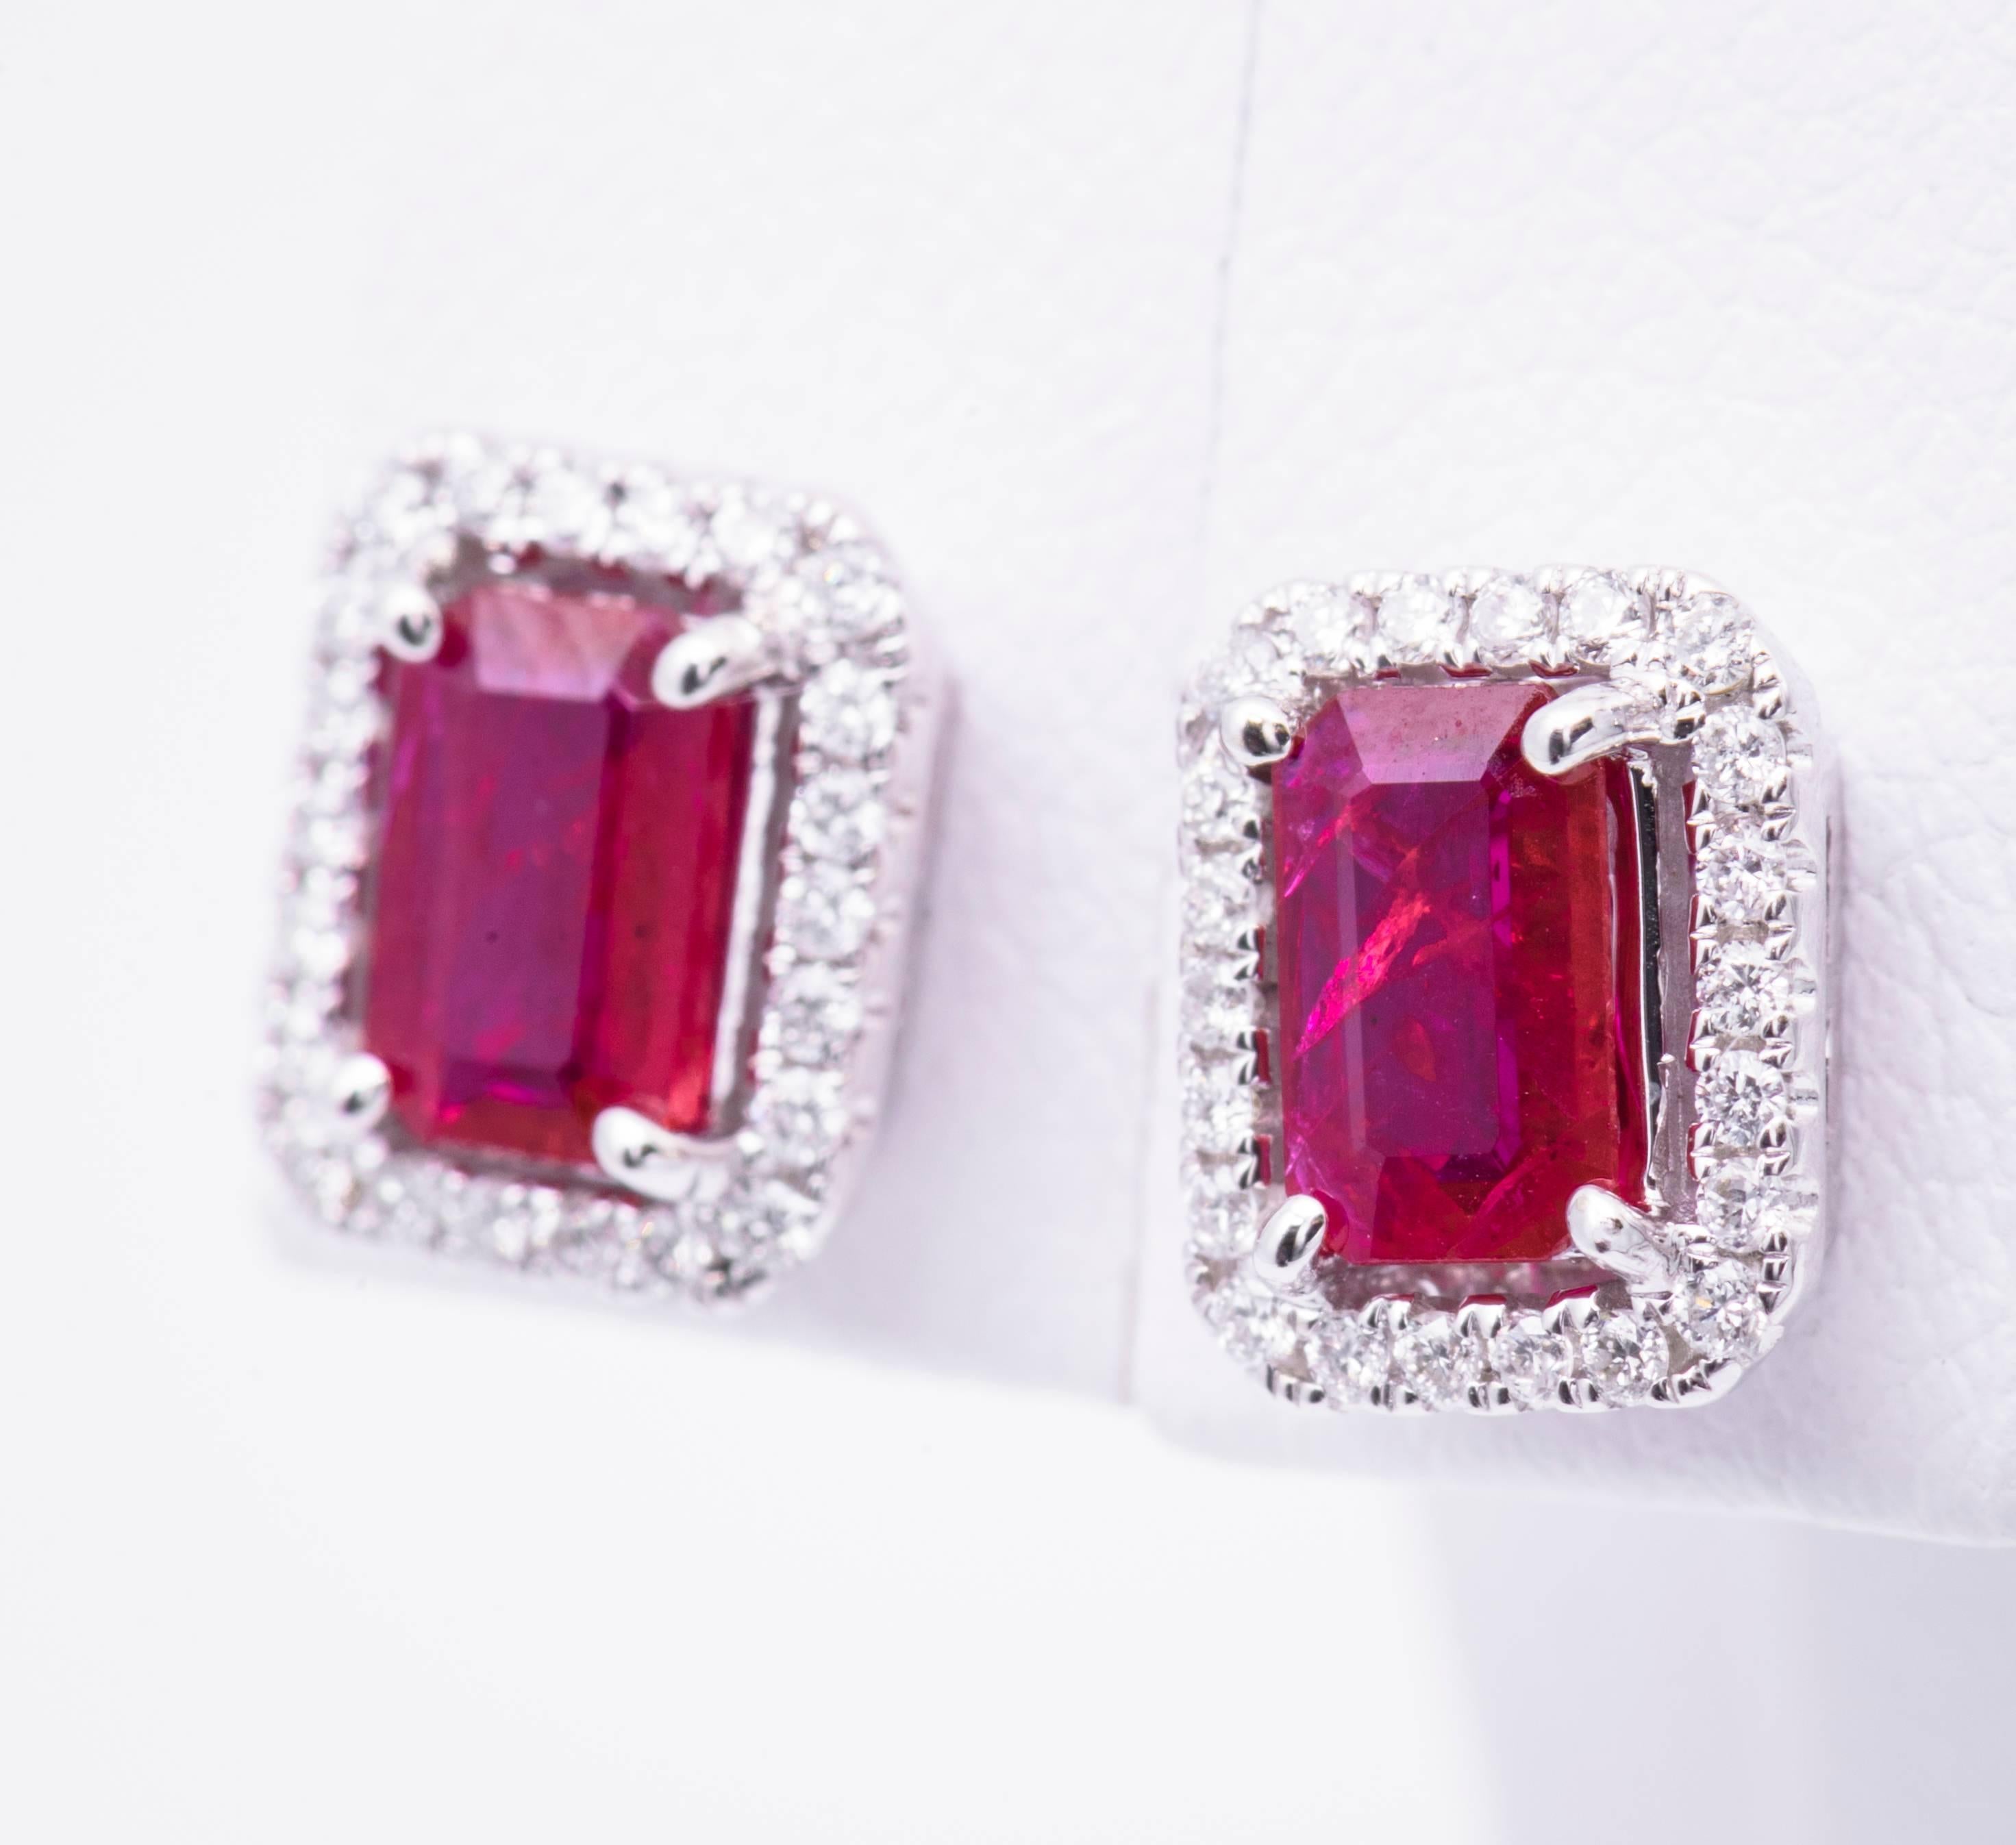 The emerald cut / cushion ruby in these earrings have a total carat weight of 1.06 carats. The diamonds have a total carat weight of 0.19 carats.
The Rubies are 6x4mm
The earrings are 9x7mm